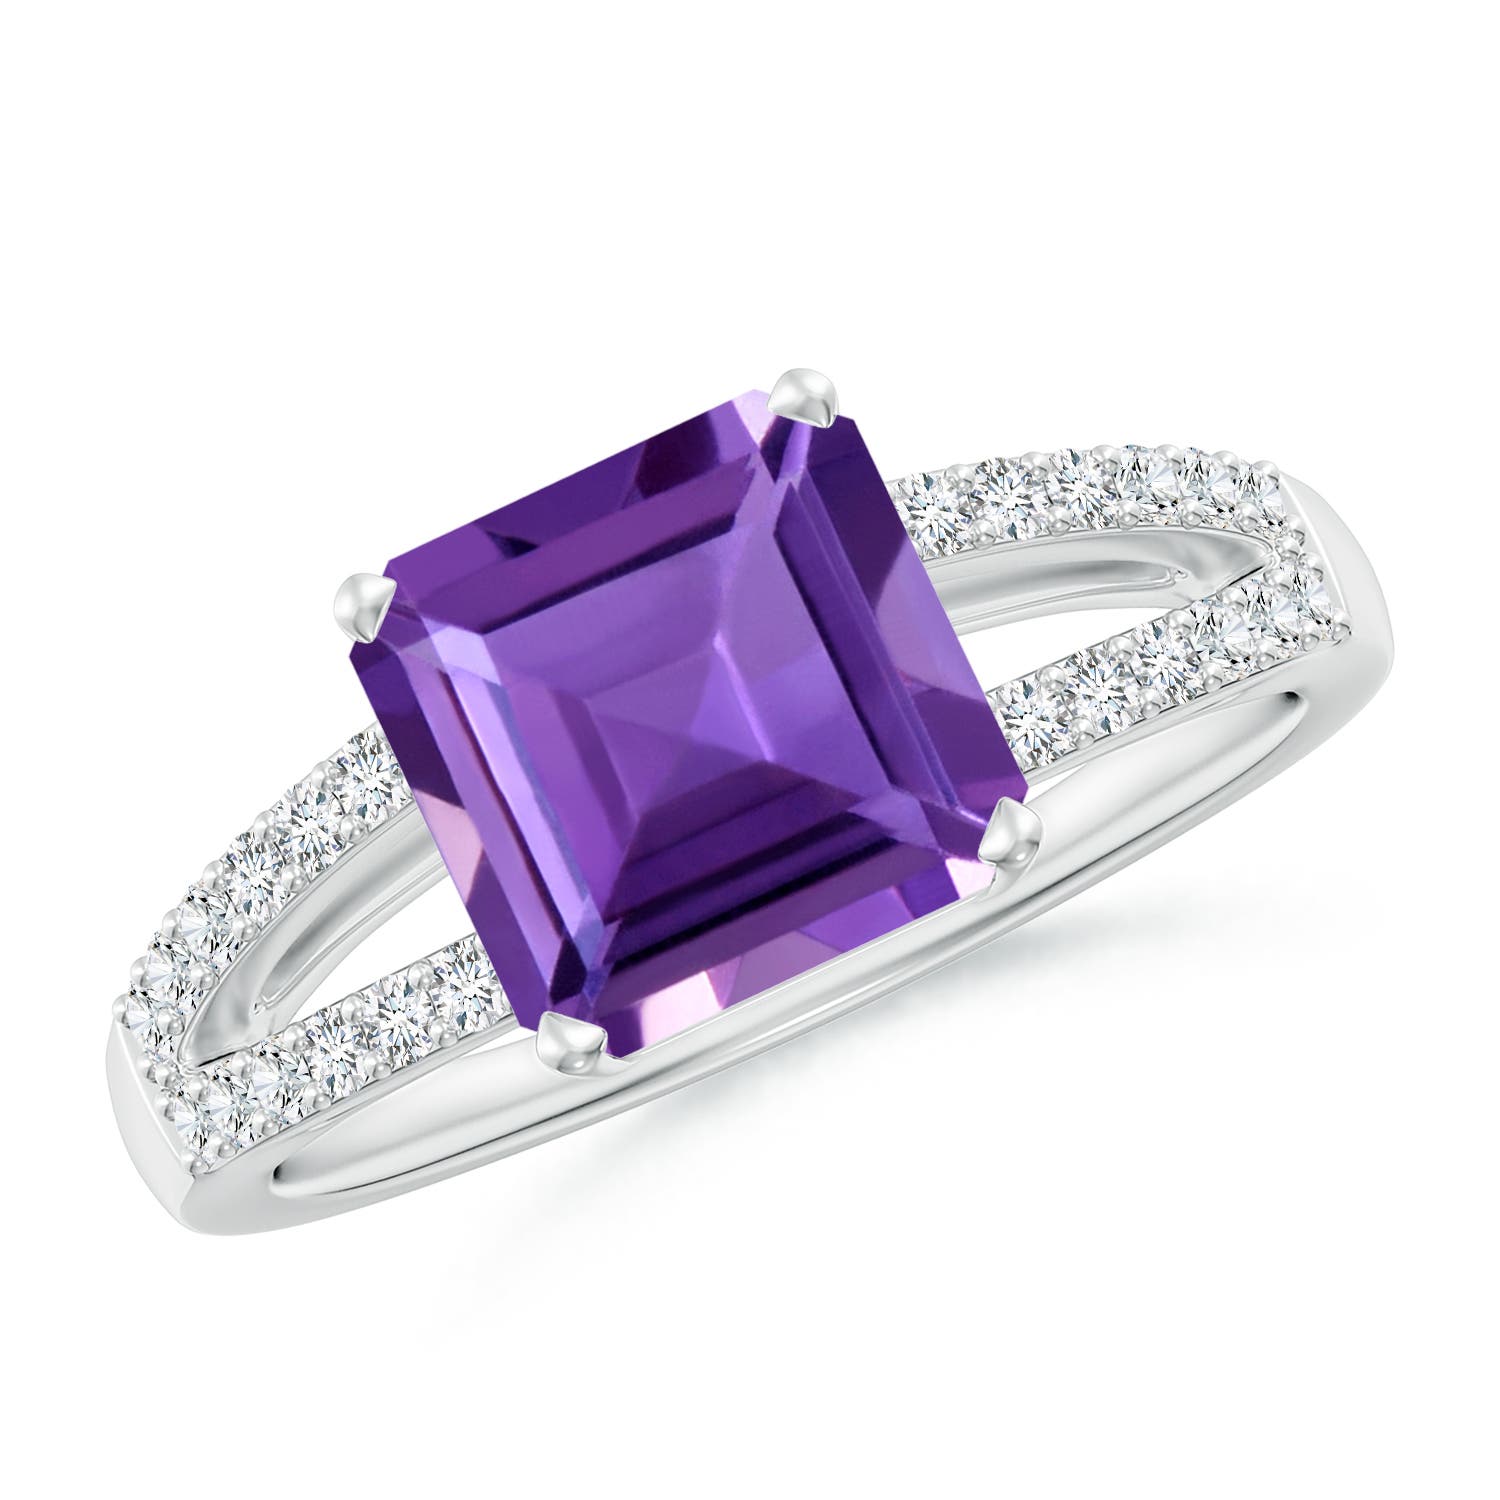 AAA - Amethyst / 2.24 CT / 14 KT White Gold